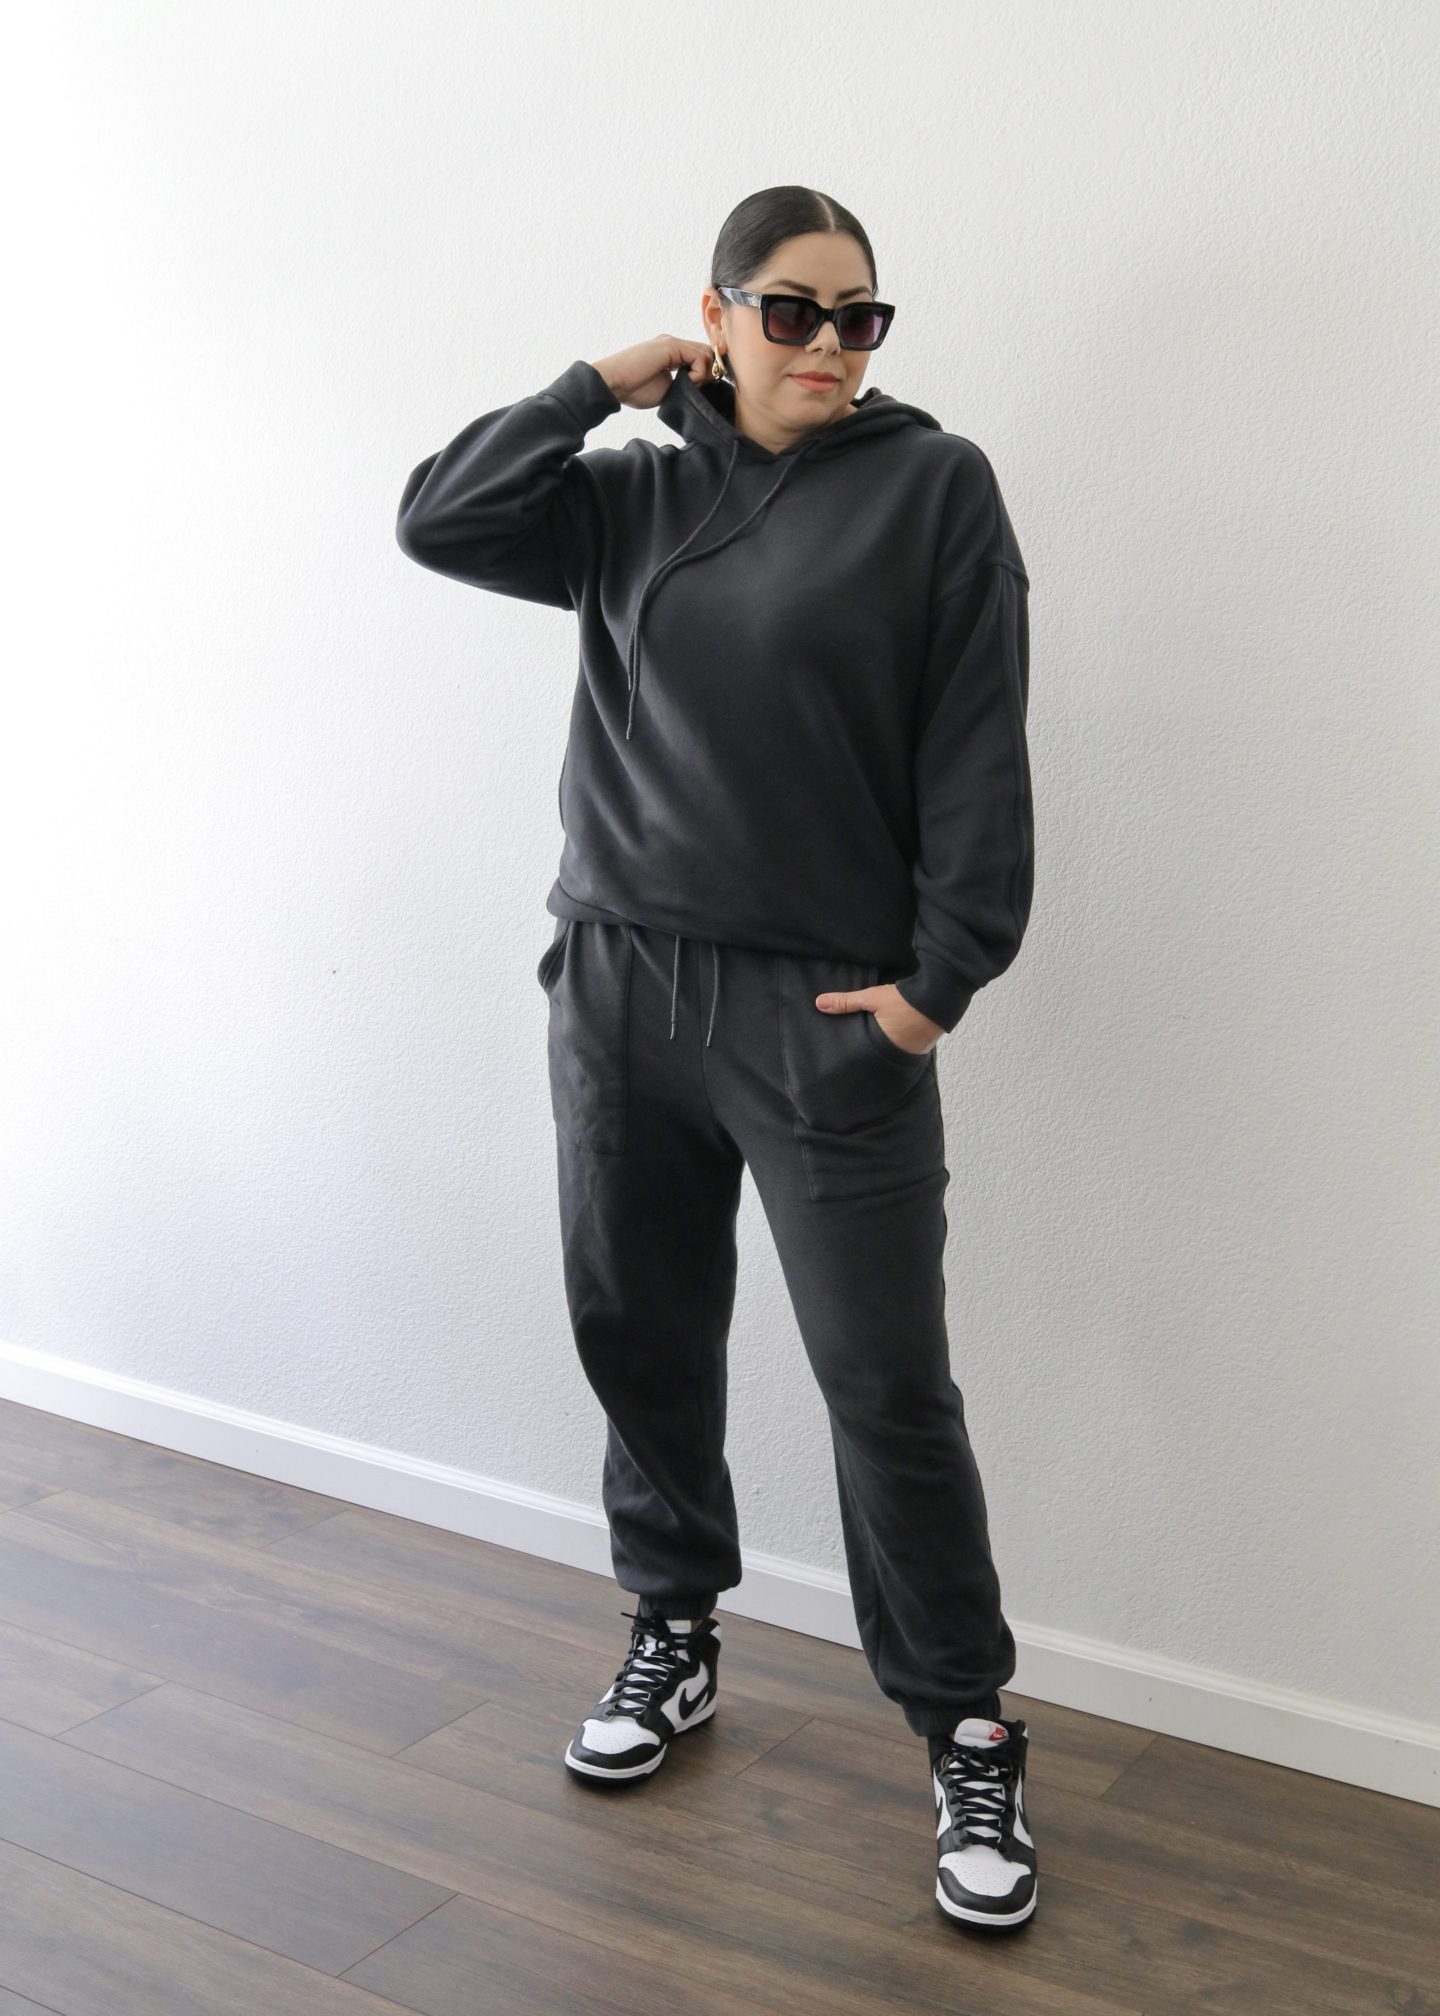 Black Sweatsuit with Dunks Outfit, swaggy outfit for women, how to style black and white dunks high